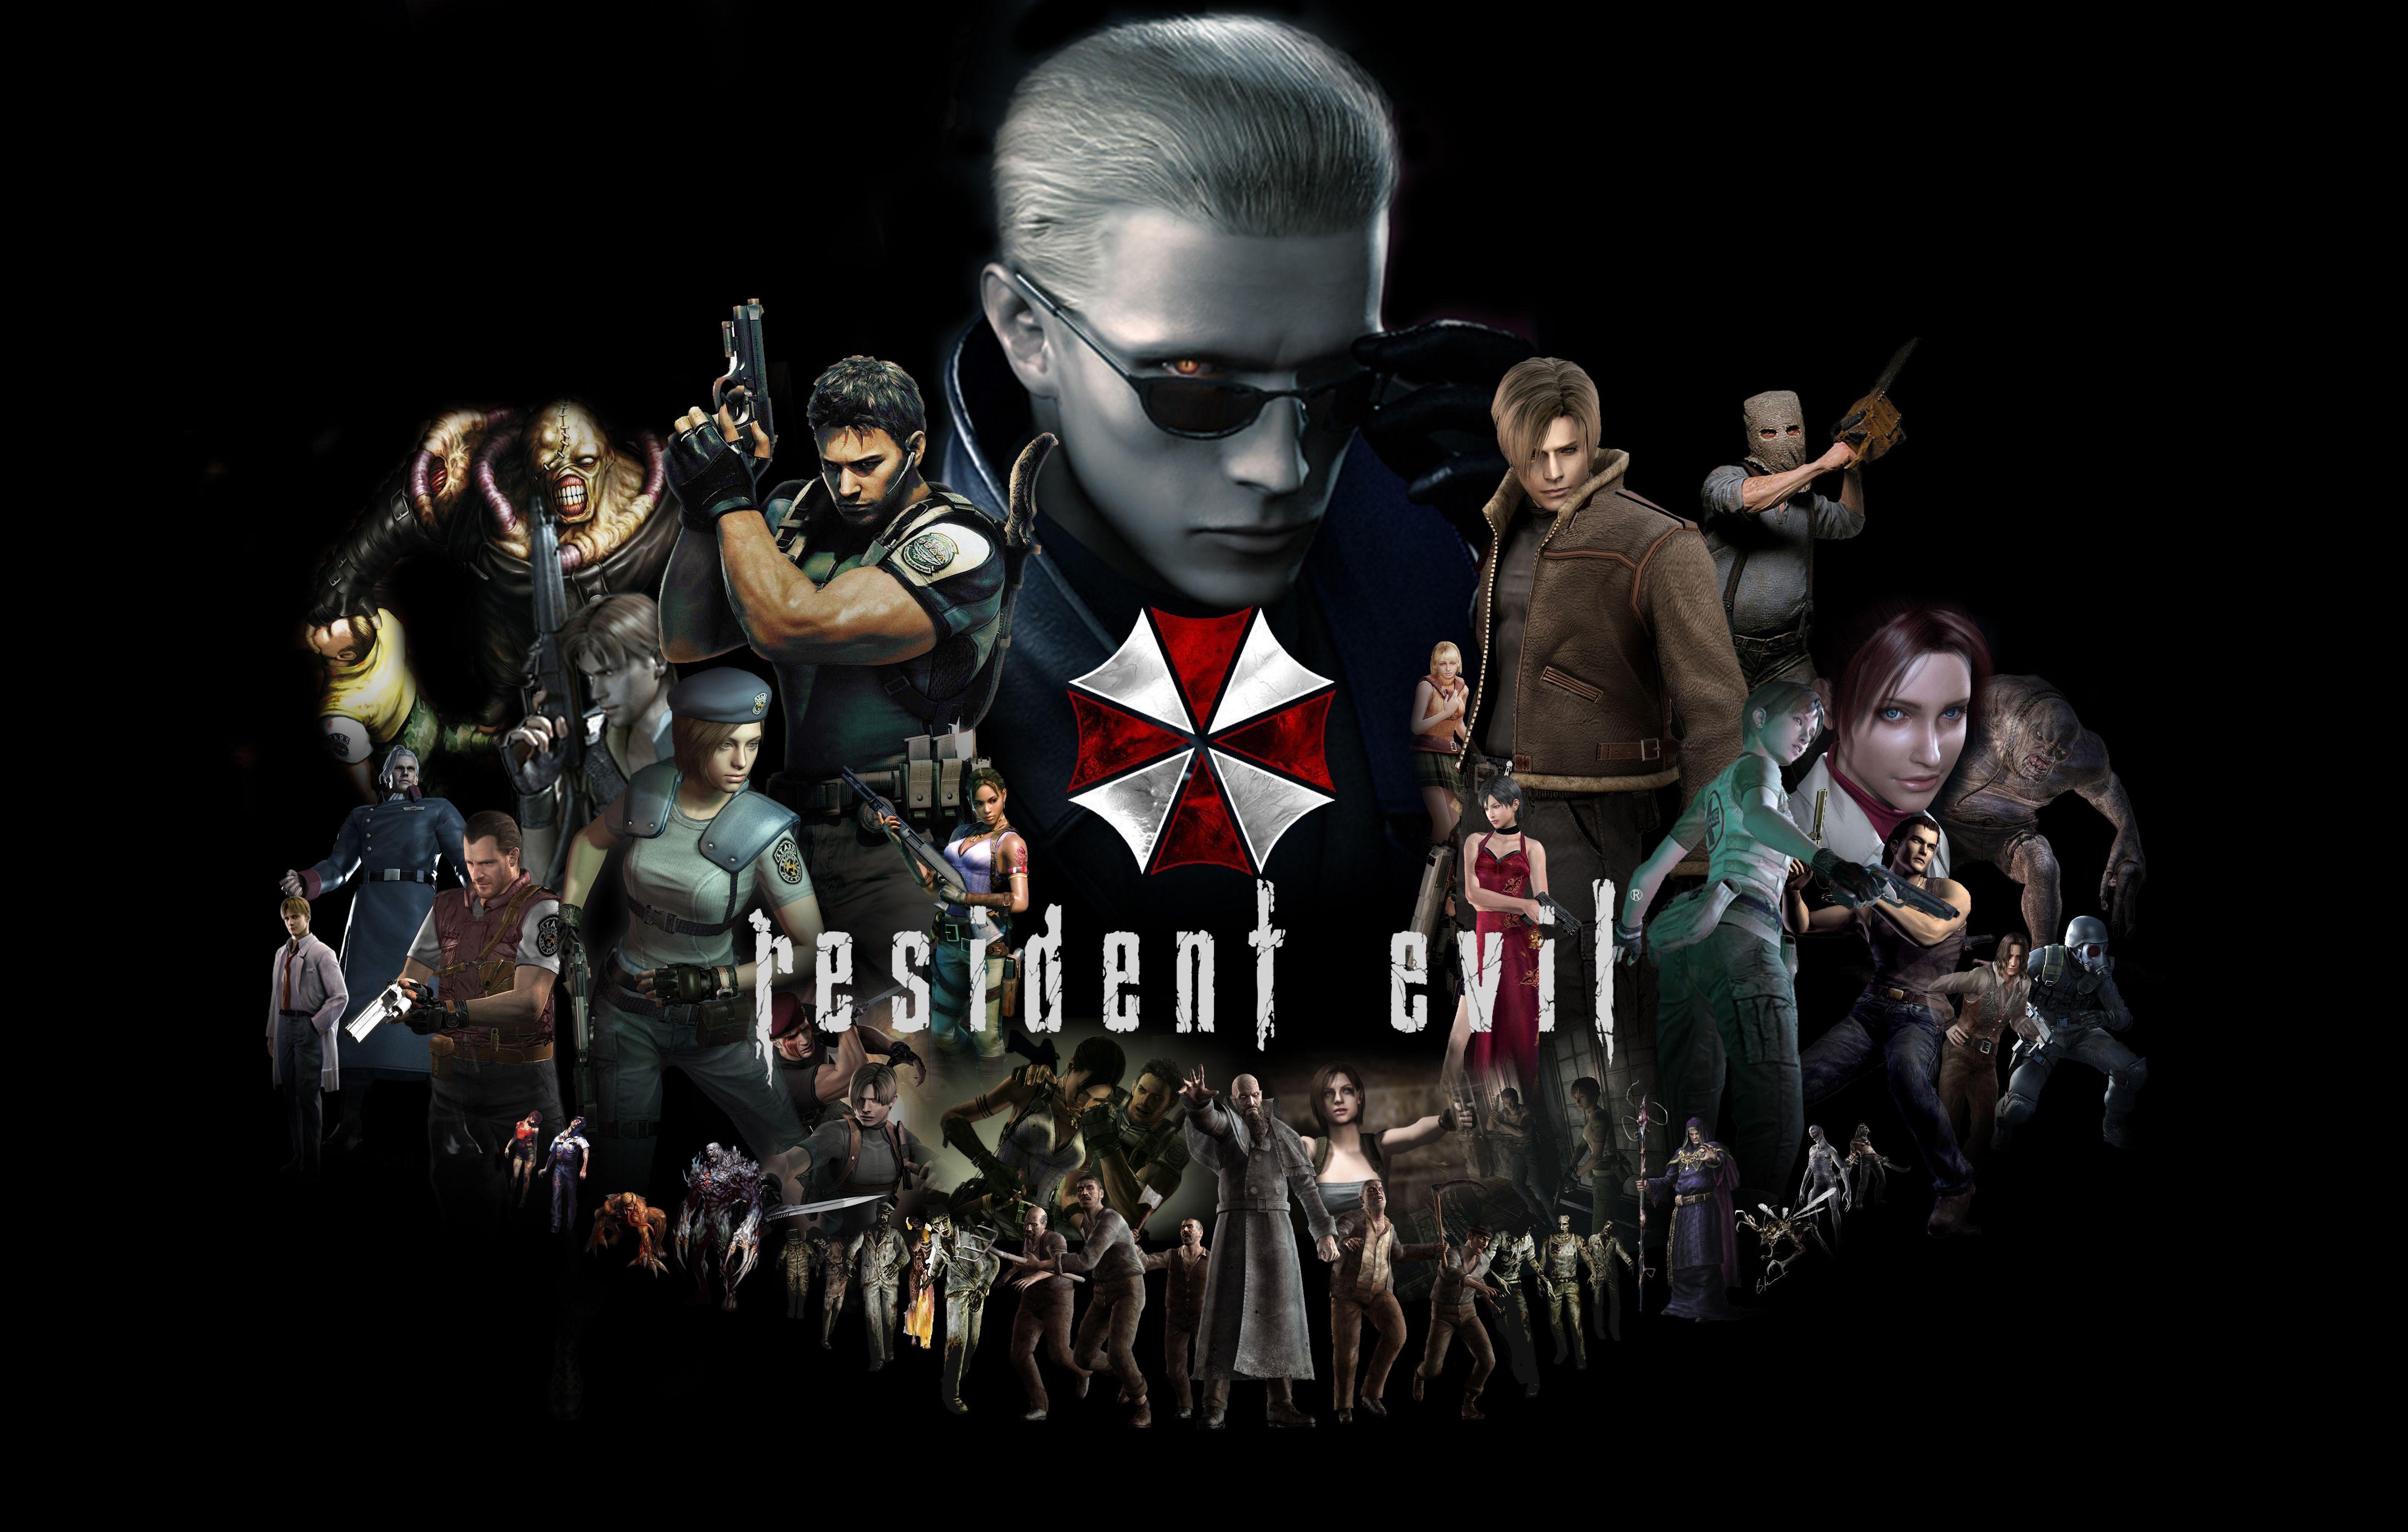 A Definitive Ranking of the 'Resident Evil' Games